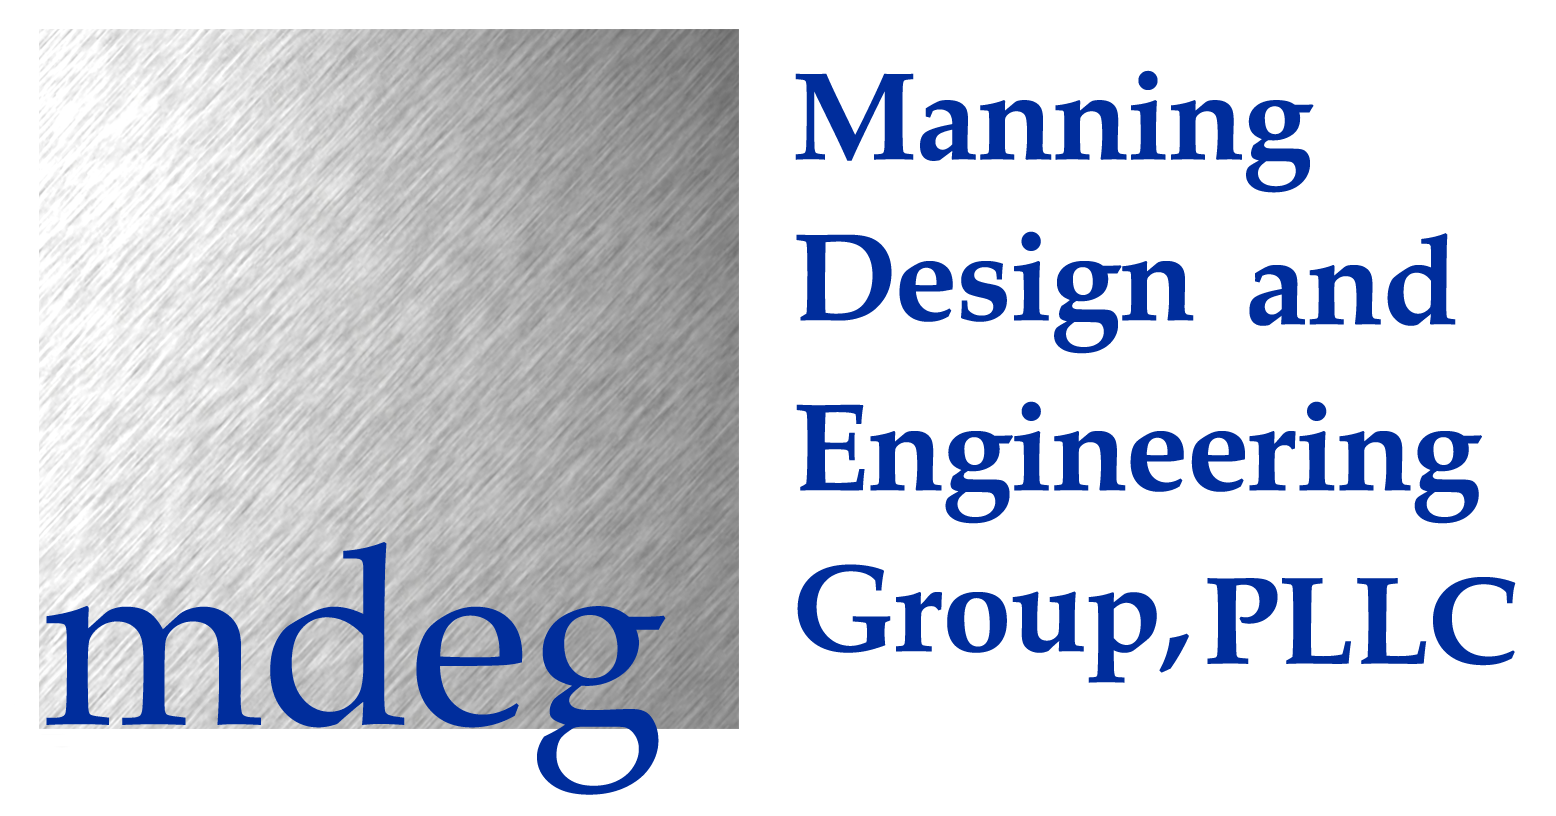 Manning Design and Engineering Group, PLLC logo